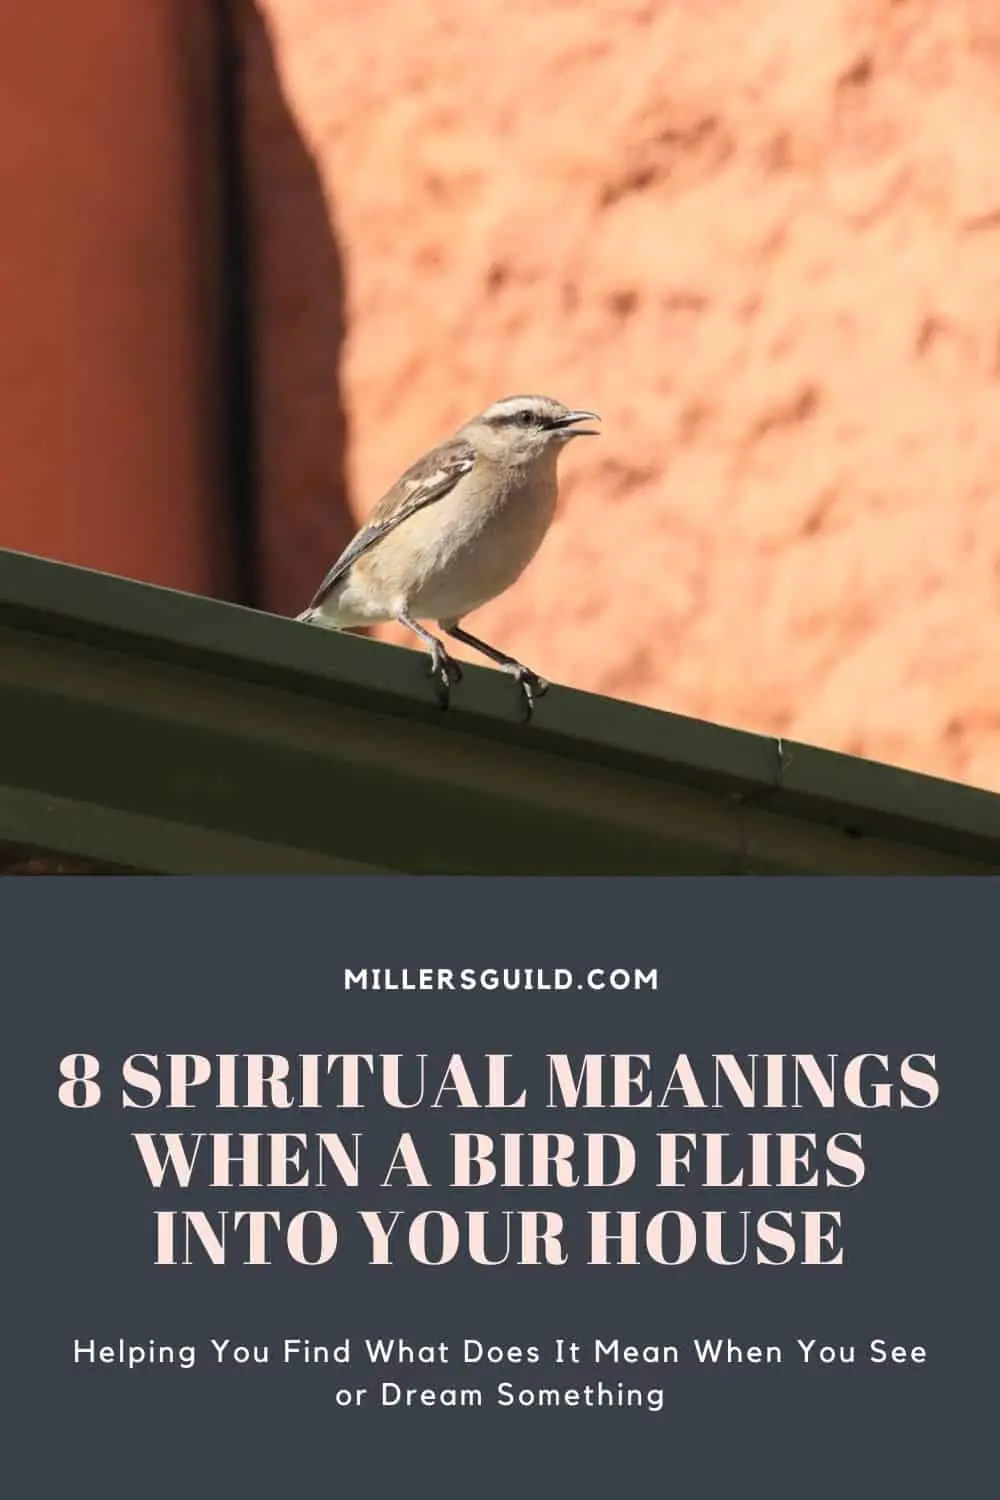 Common Types Of Birds Flying Into Houses